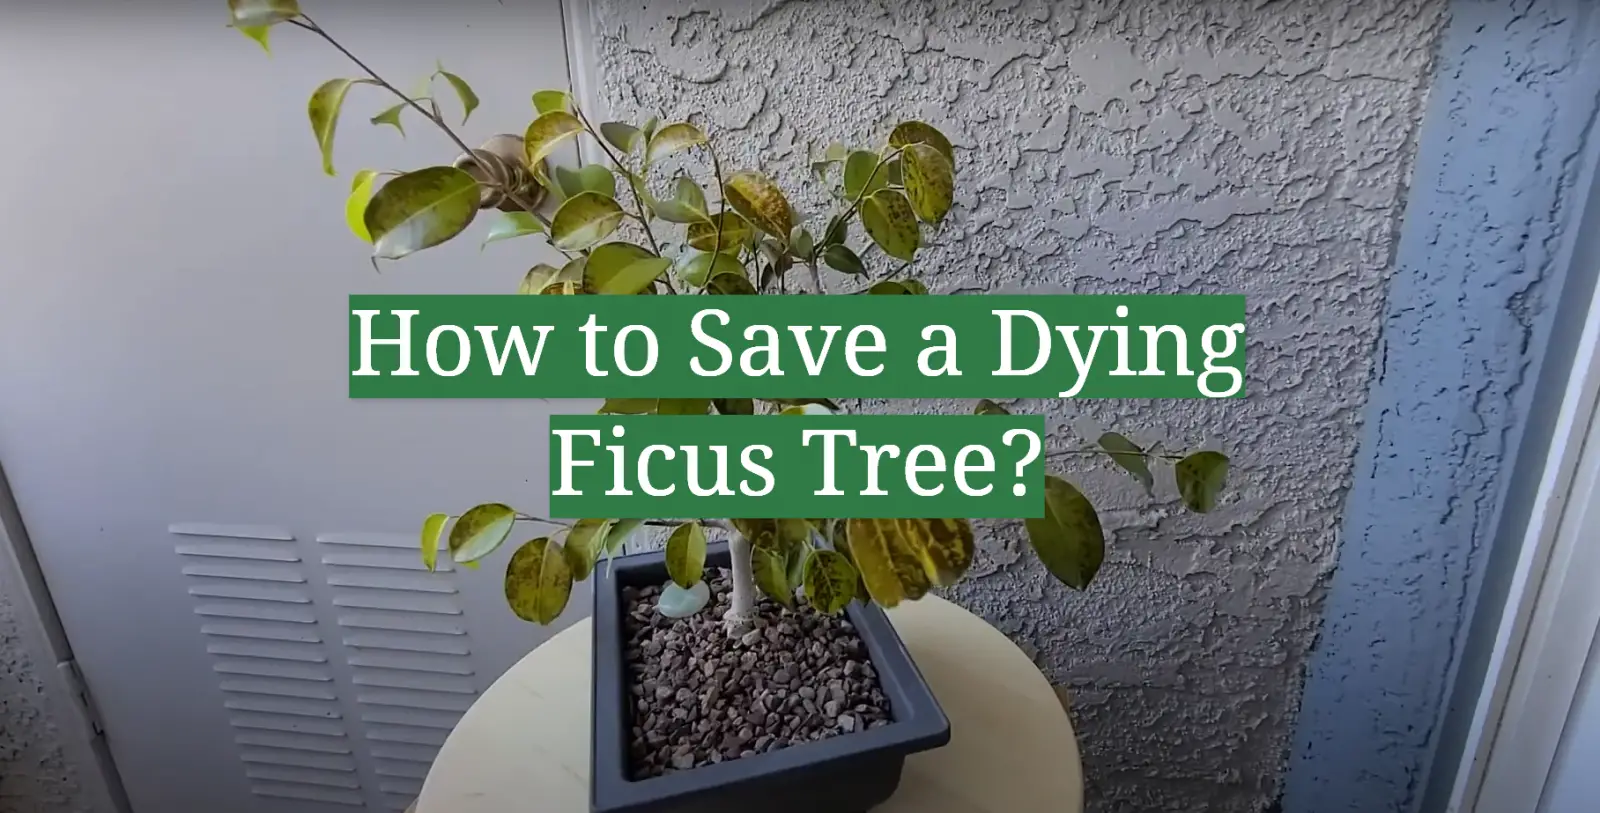 How to Save a Dying Ficus Tree?